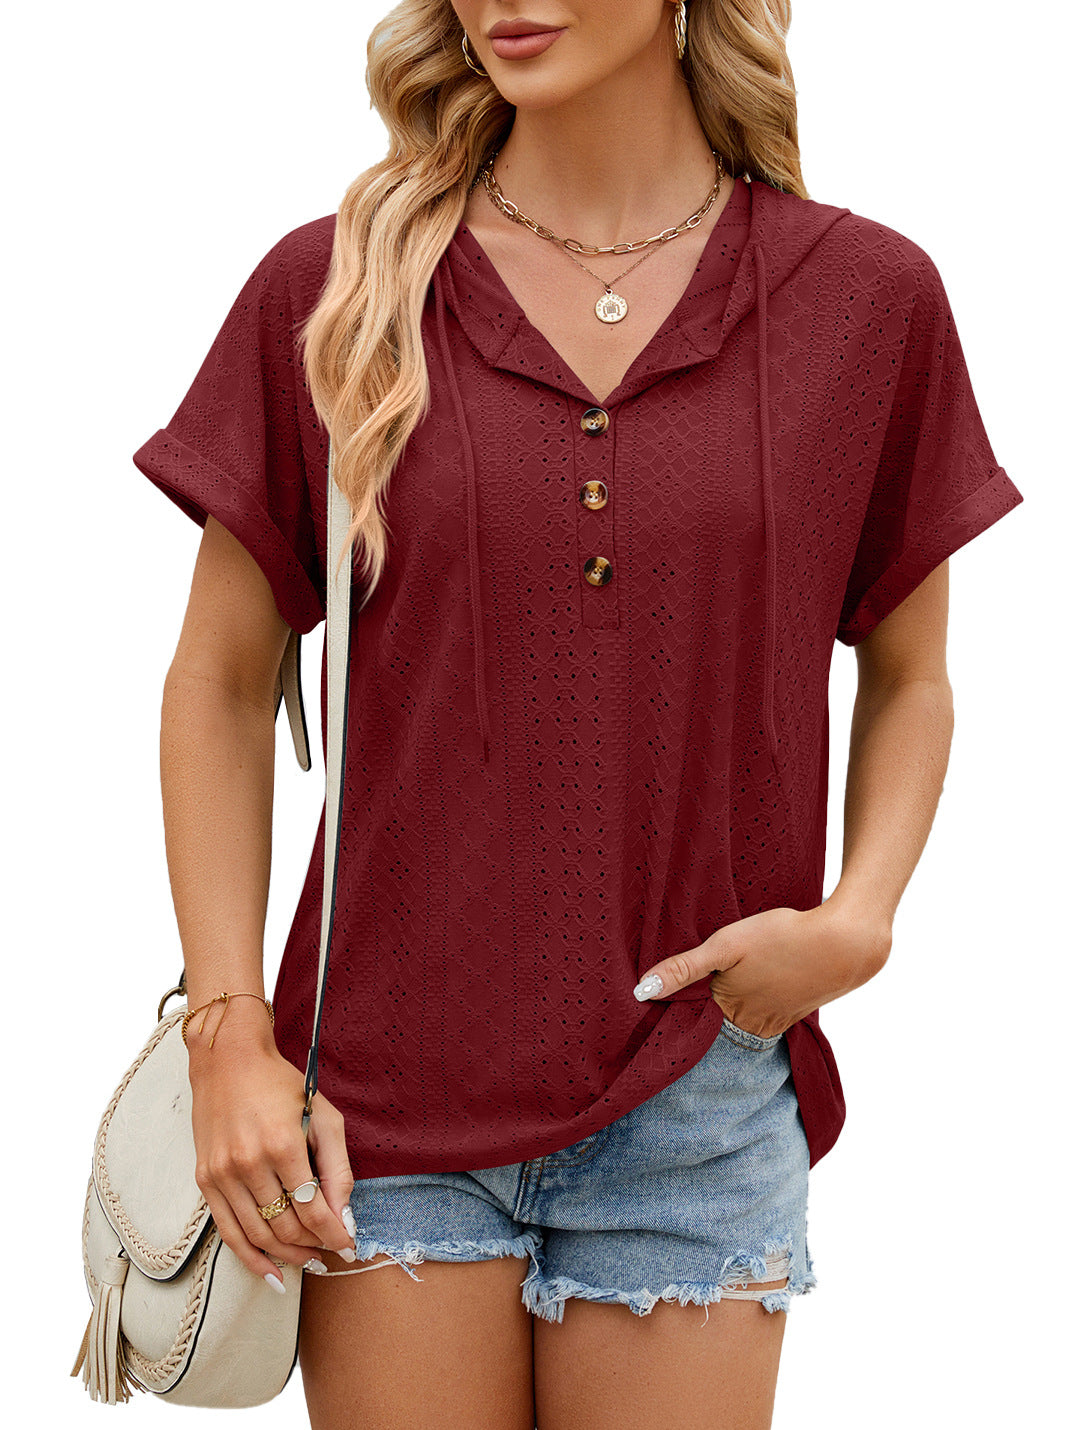 New Solid Color Hooded Button T-shirt Loose Hollow Design Short-sleeved Top For Womens Clothing